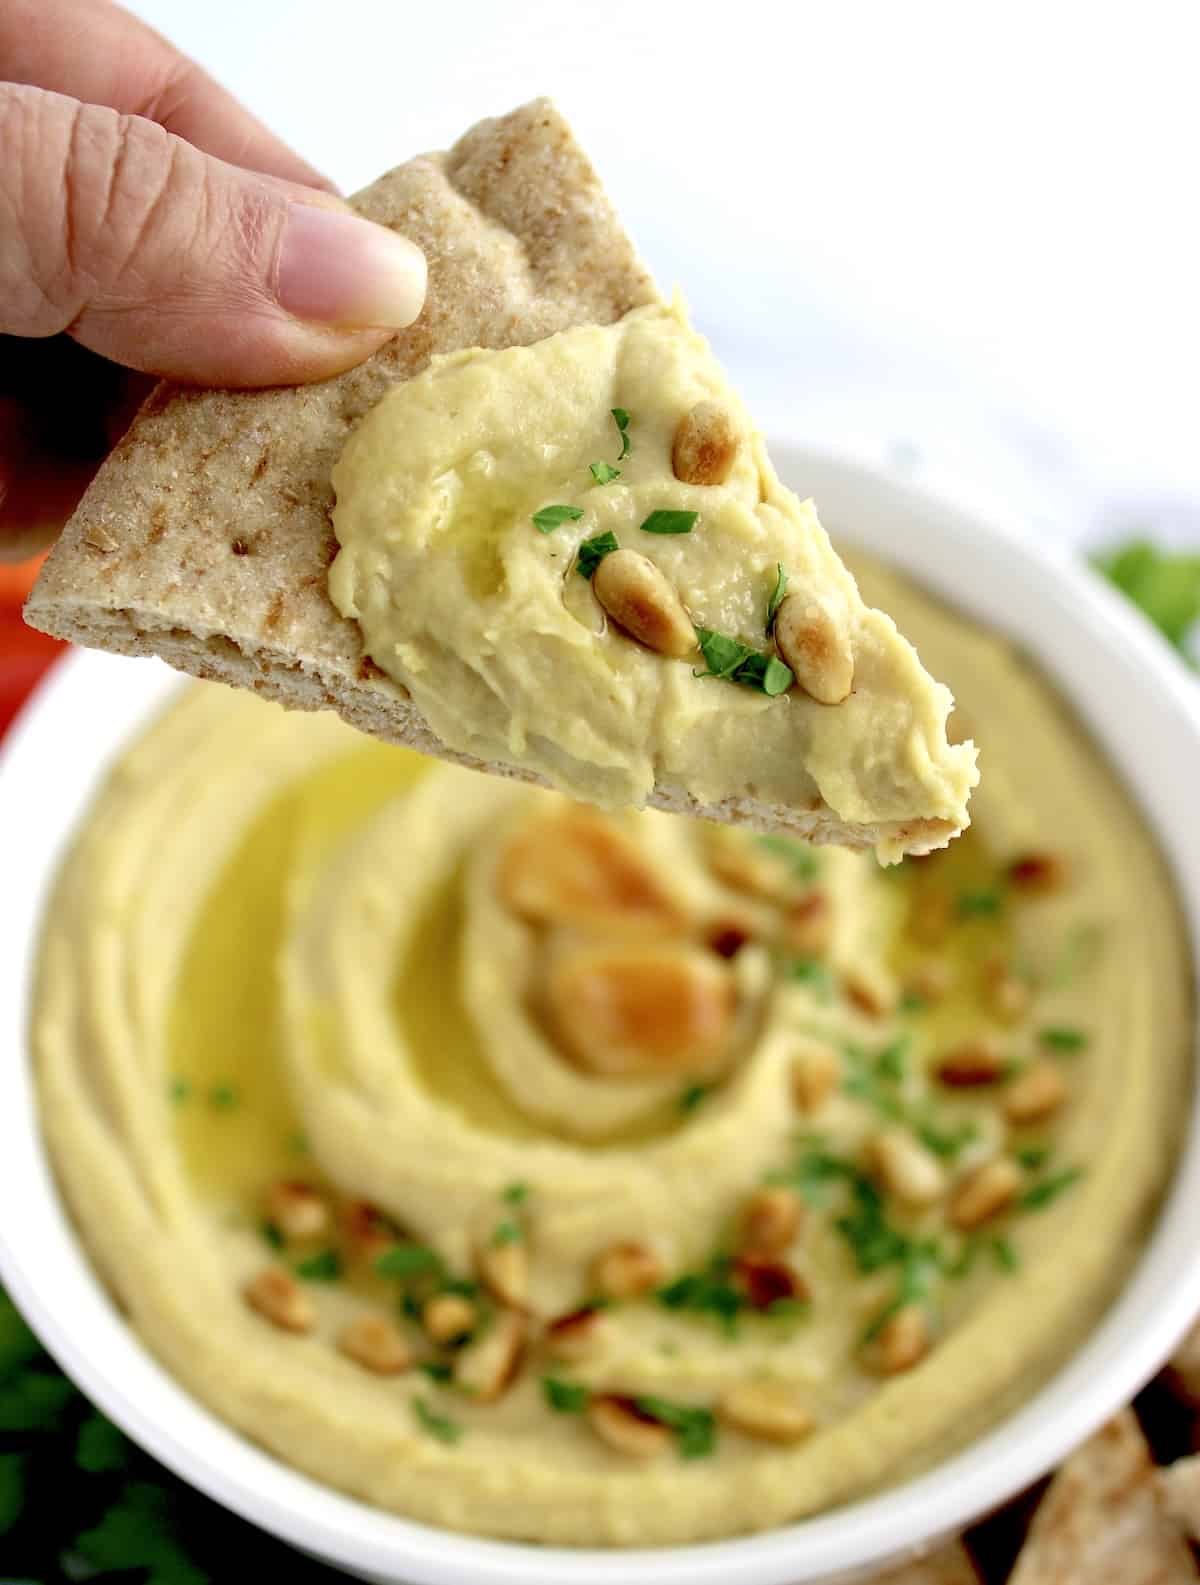 holding up pita wedge with hummus and pine nuts on top held up over bowl of hummus